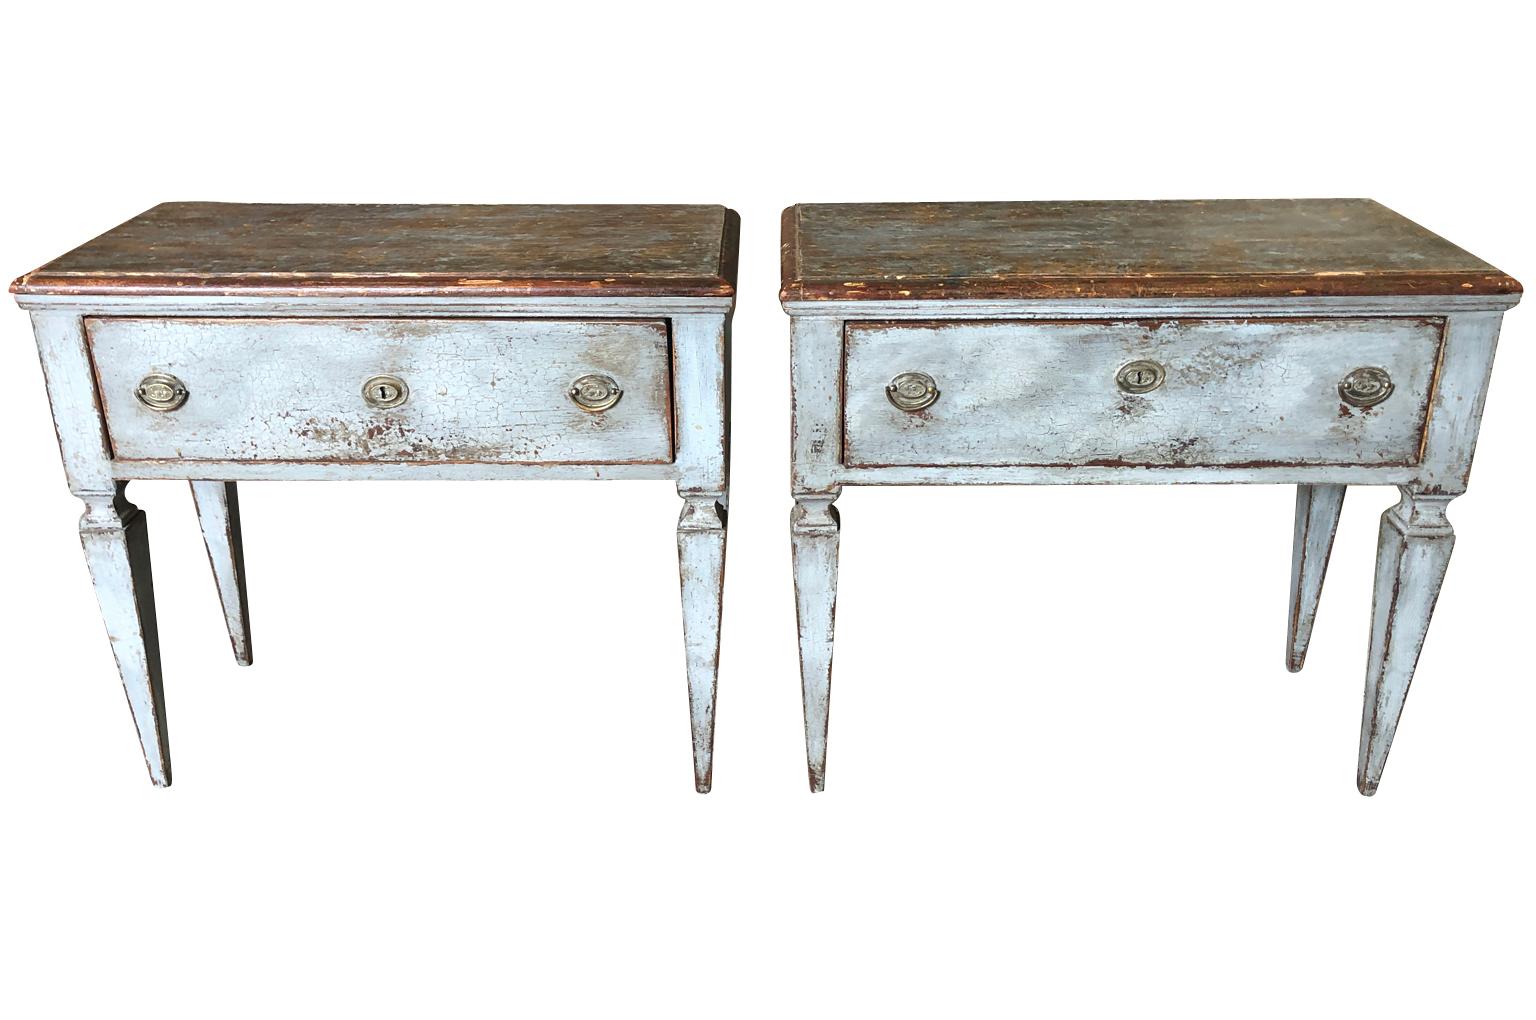 A charming pair of side tables - consoles from the South of France constructed from painted wood with a single drawer on tapered legs and finished on all sides. Lovely patina. Perfect not only as end tables, but terrific as bedside tables as well.